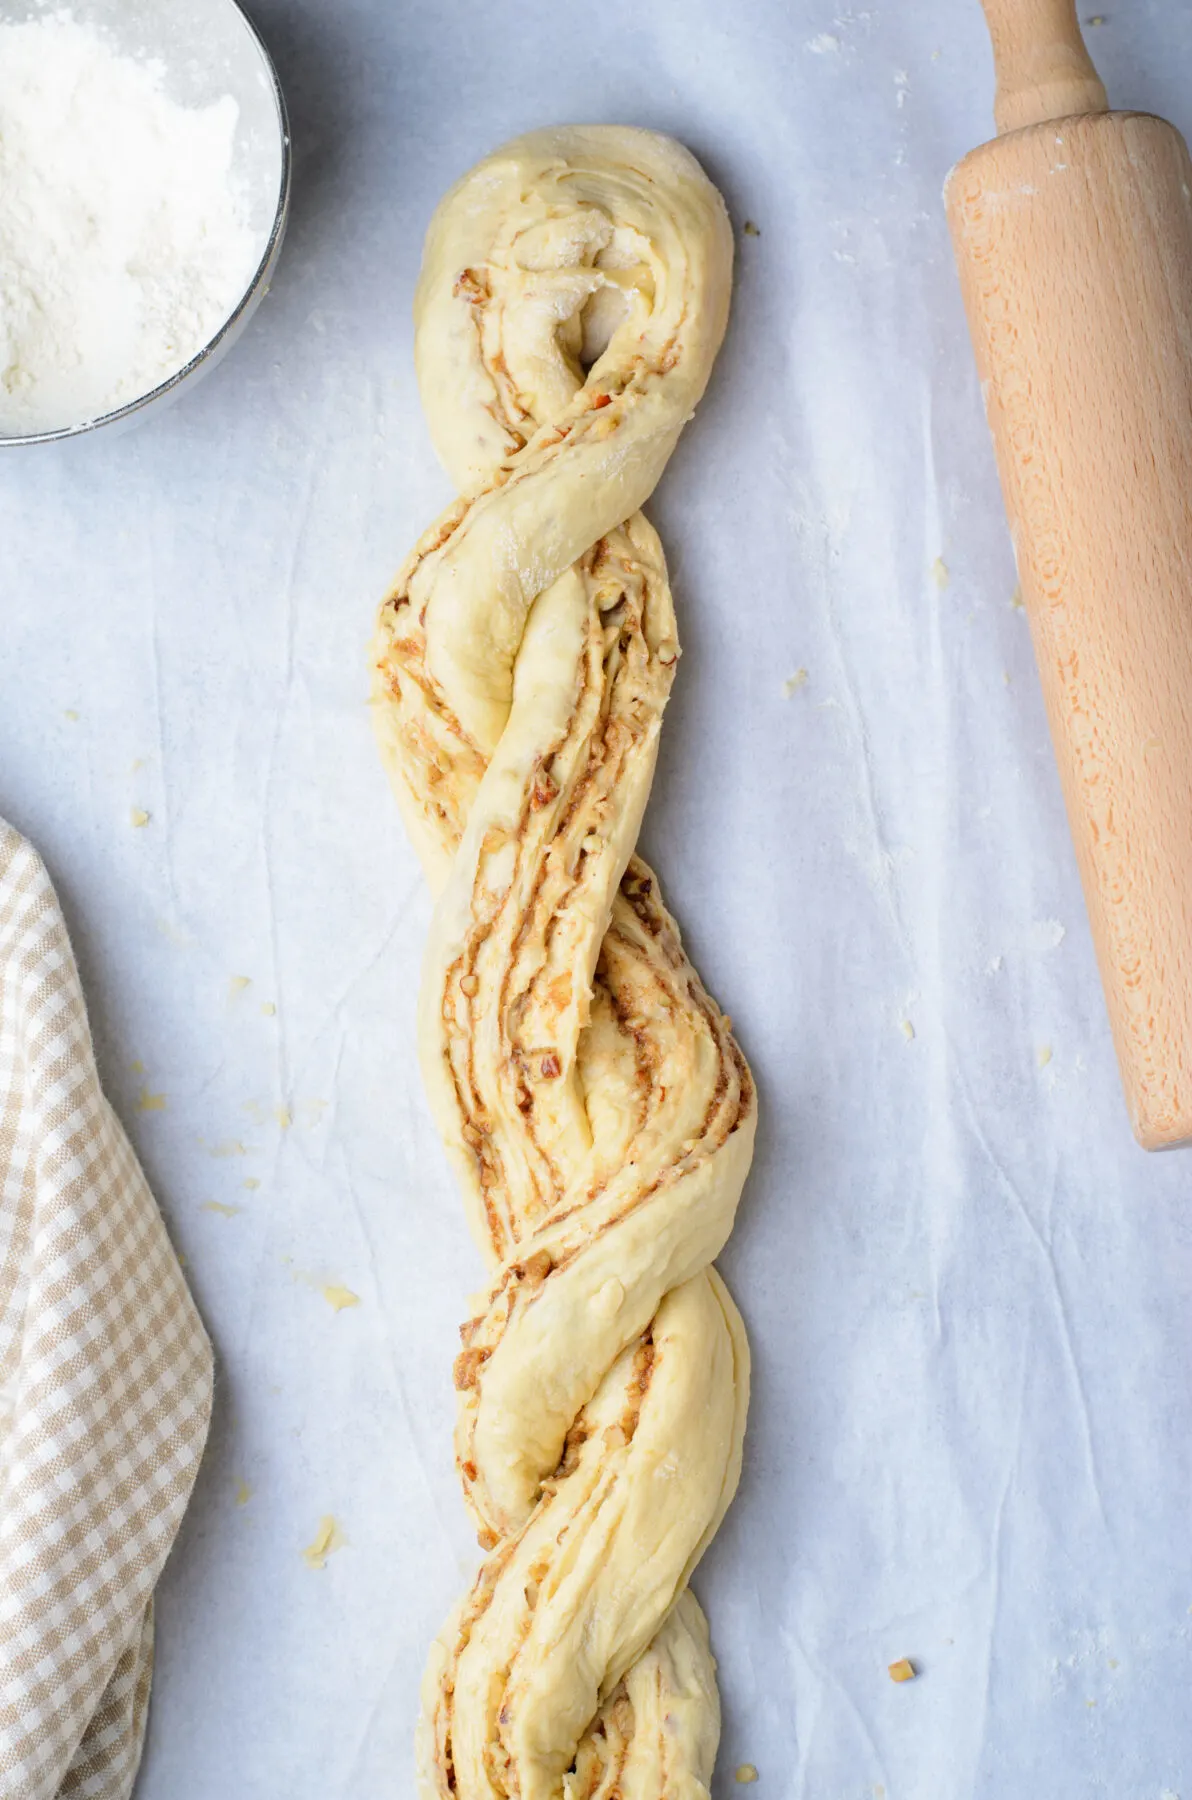 the two strands of dough twisted together.